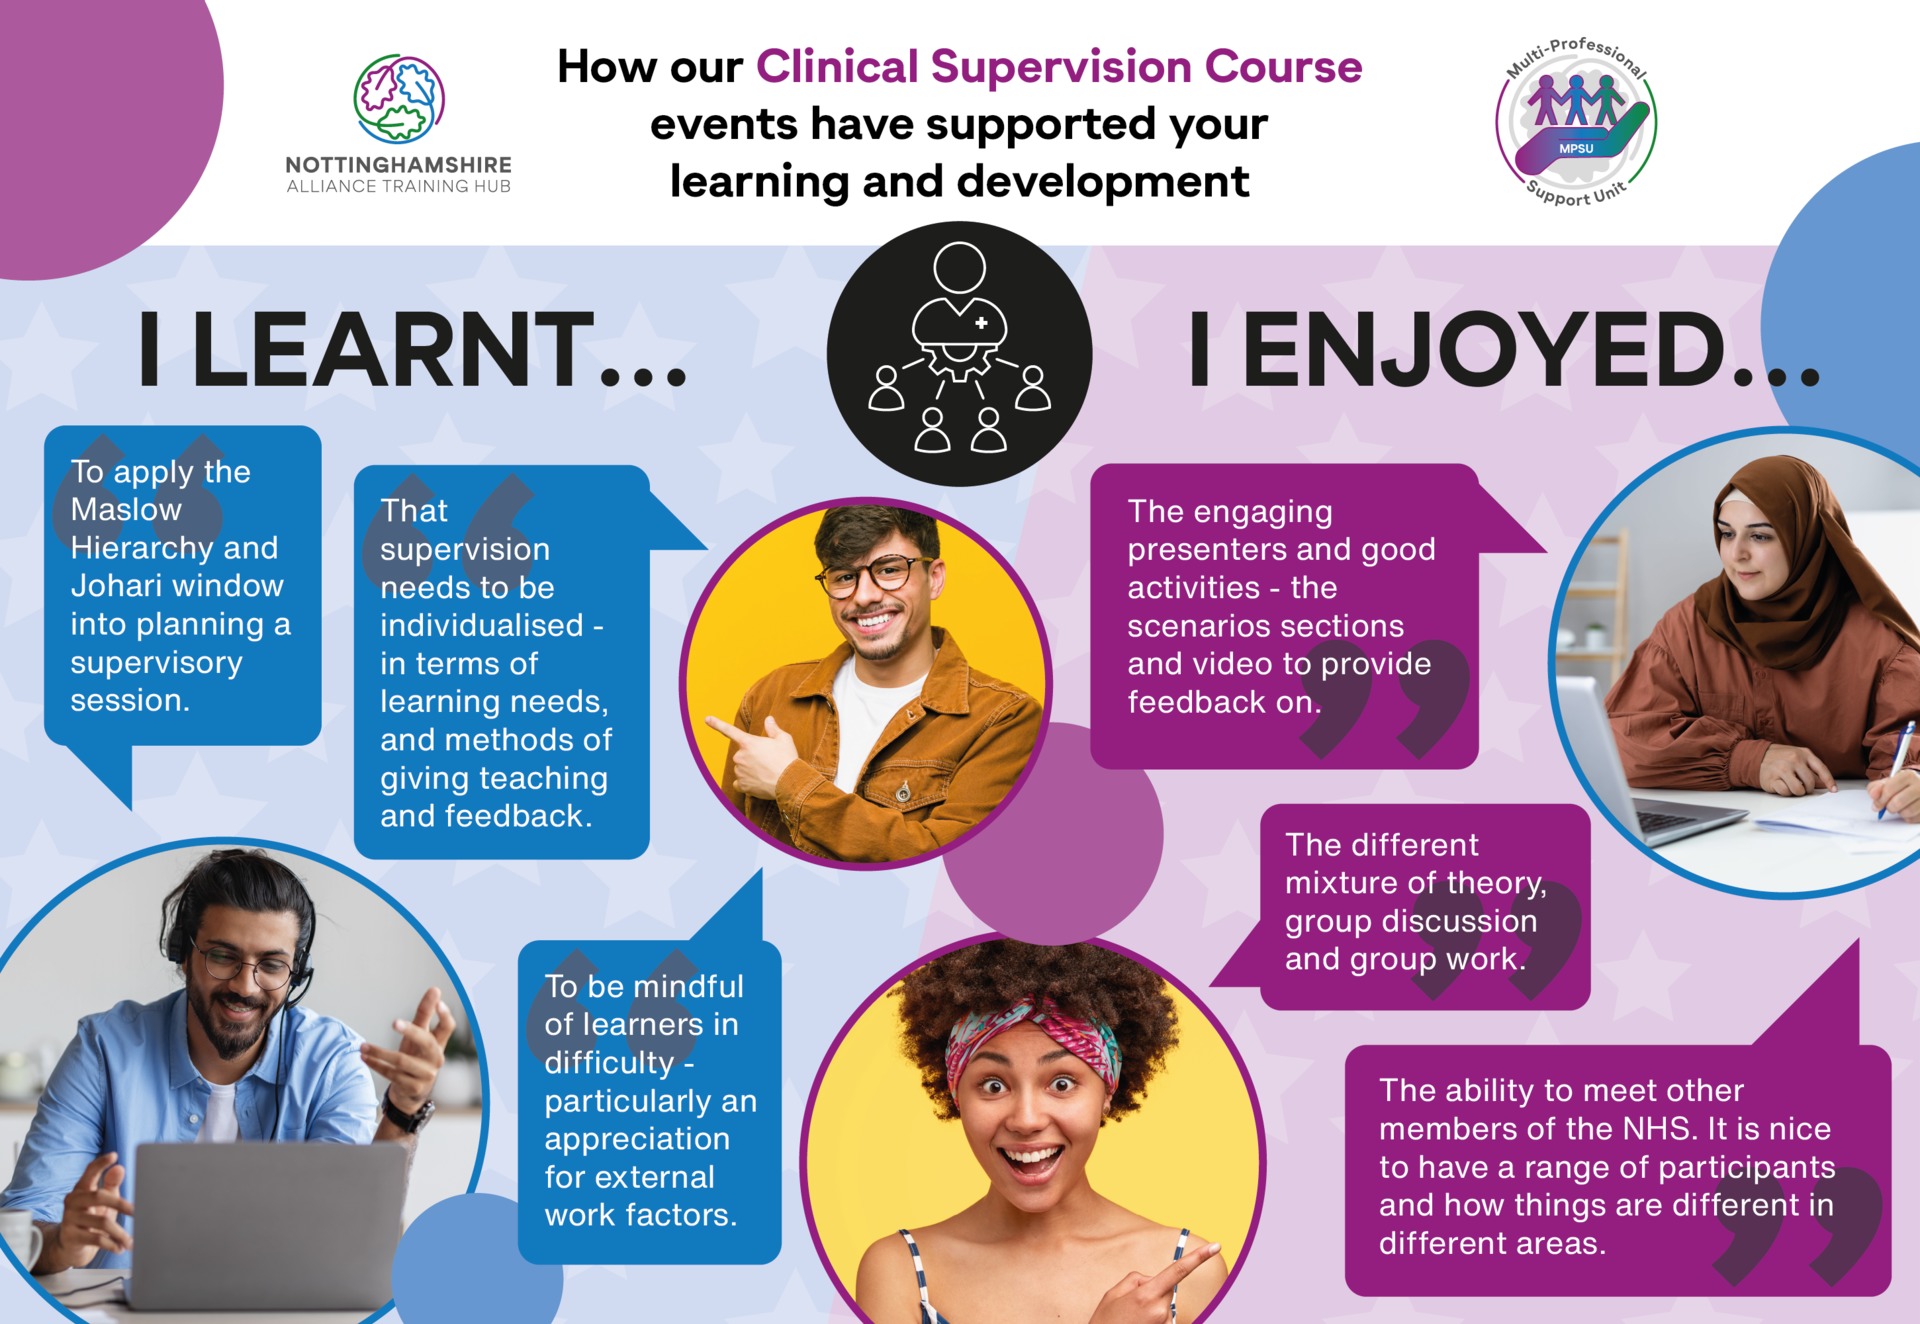 How our Clinical Supervision Course events have supported your learning and development. I learnt: to apply the Maslow Hierarchy and Johari window into planning a supervisory session; that supervision needs to be individualised - in terms of learning needs and methods of giving teaching and feedback; that being mindful of learners in difficulty - appreciation for external work factors particularly. I enjoyed: ability to meet other members of the NHS, nice to have a different range of participants and how things are different in different areas; the different mixture of theory, group discussion and group work; the engaging presenters, good activities. Enjoyed the scenarios sections and the video to provide feedback on.